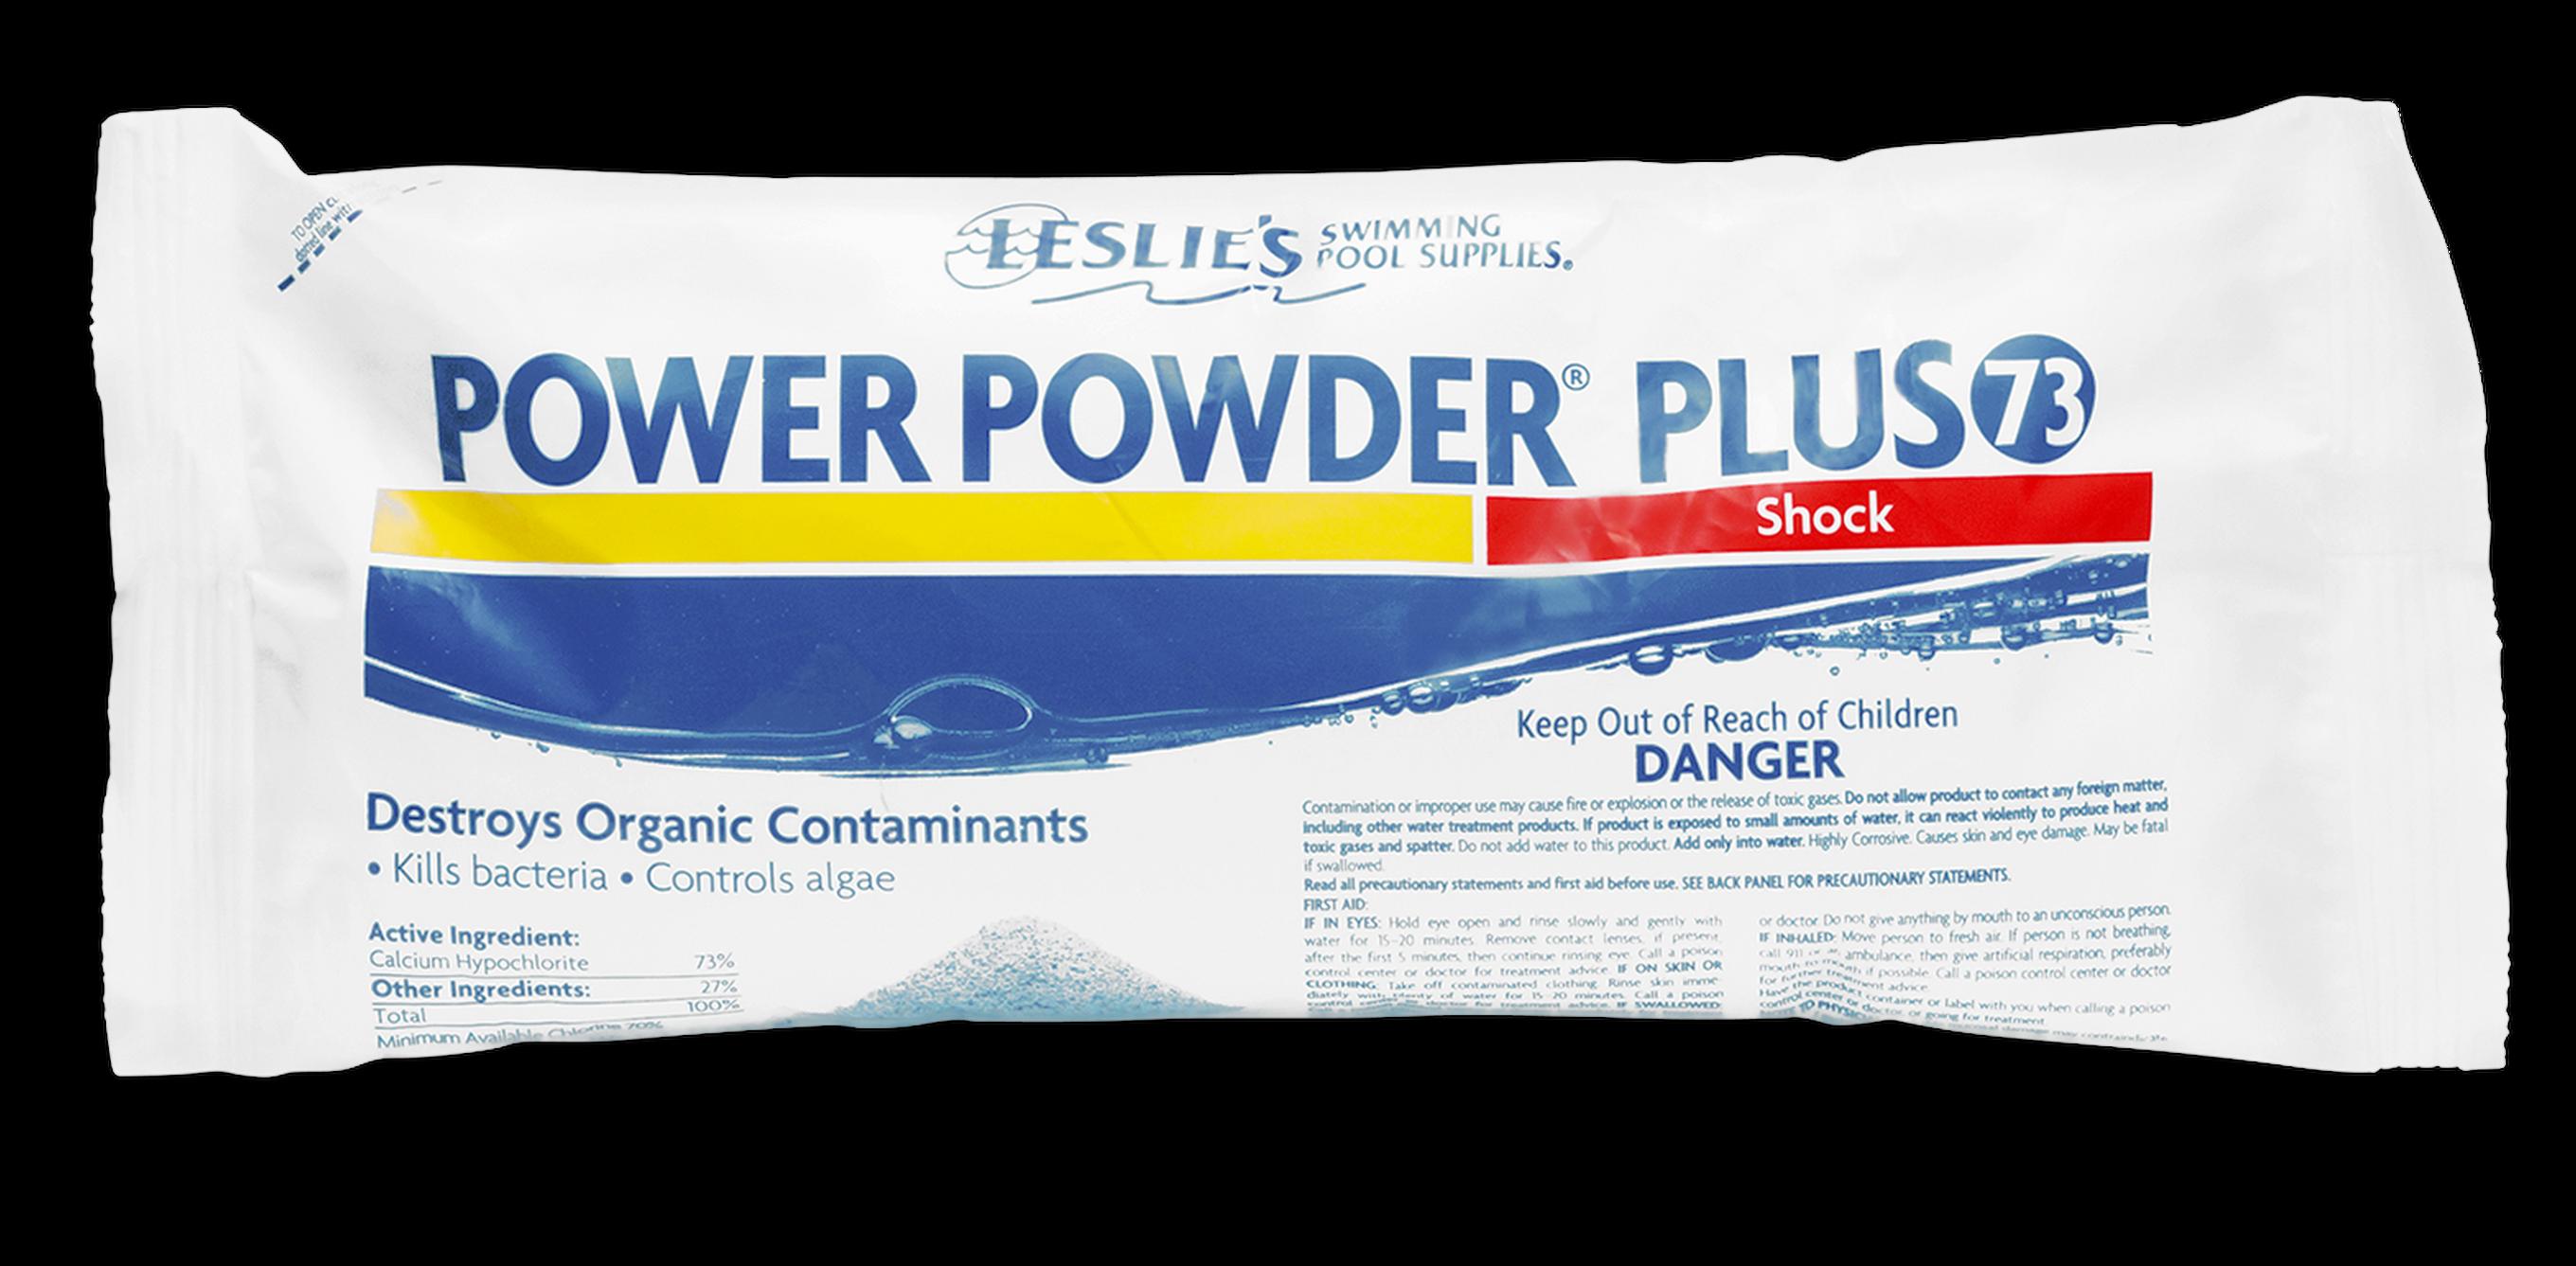 A picture of Power Powder